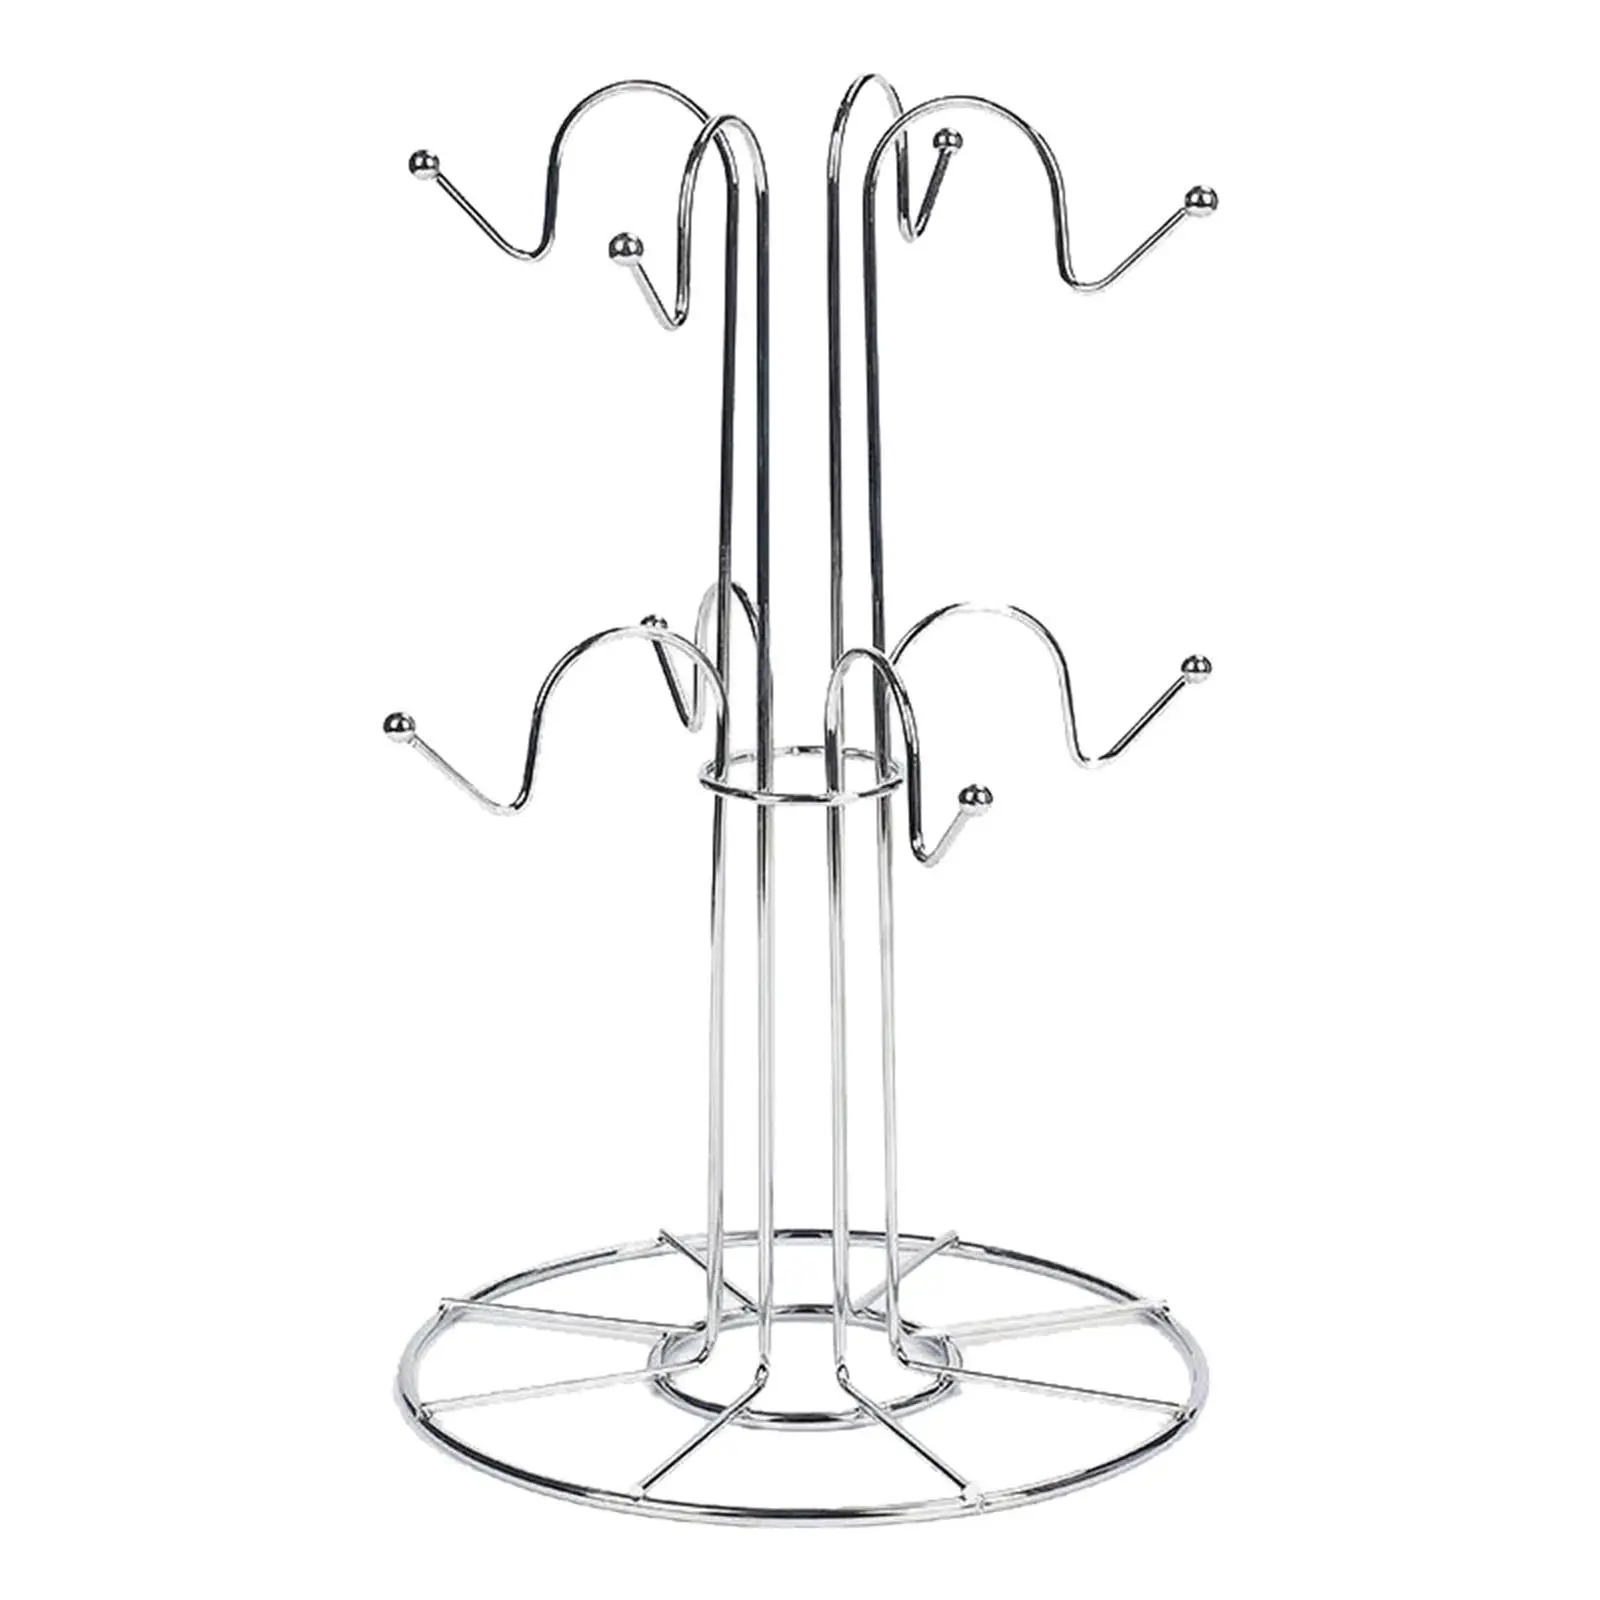 Cup Drying Rack with 8 Cup Hooks Drainer Tree Metal Stylish Stand for Home Countertop